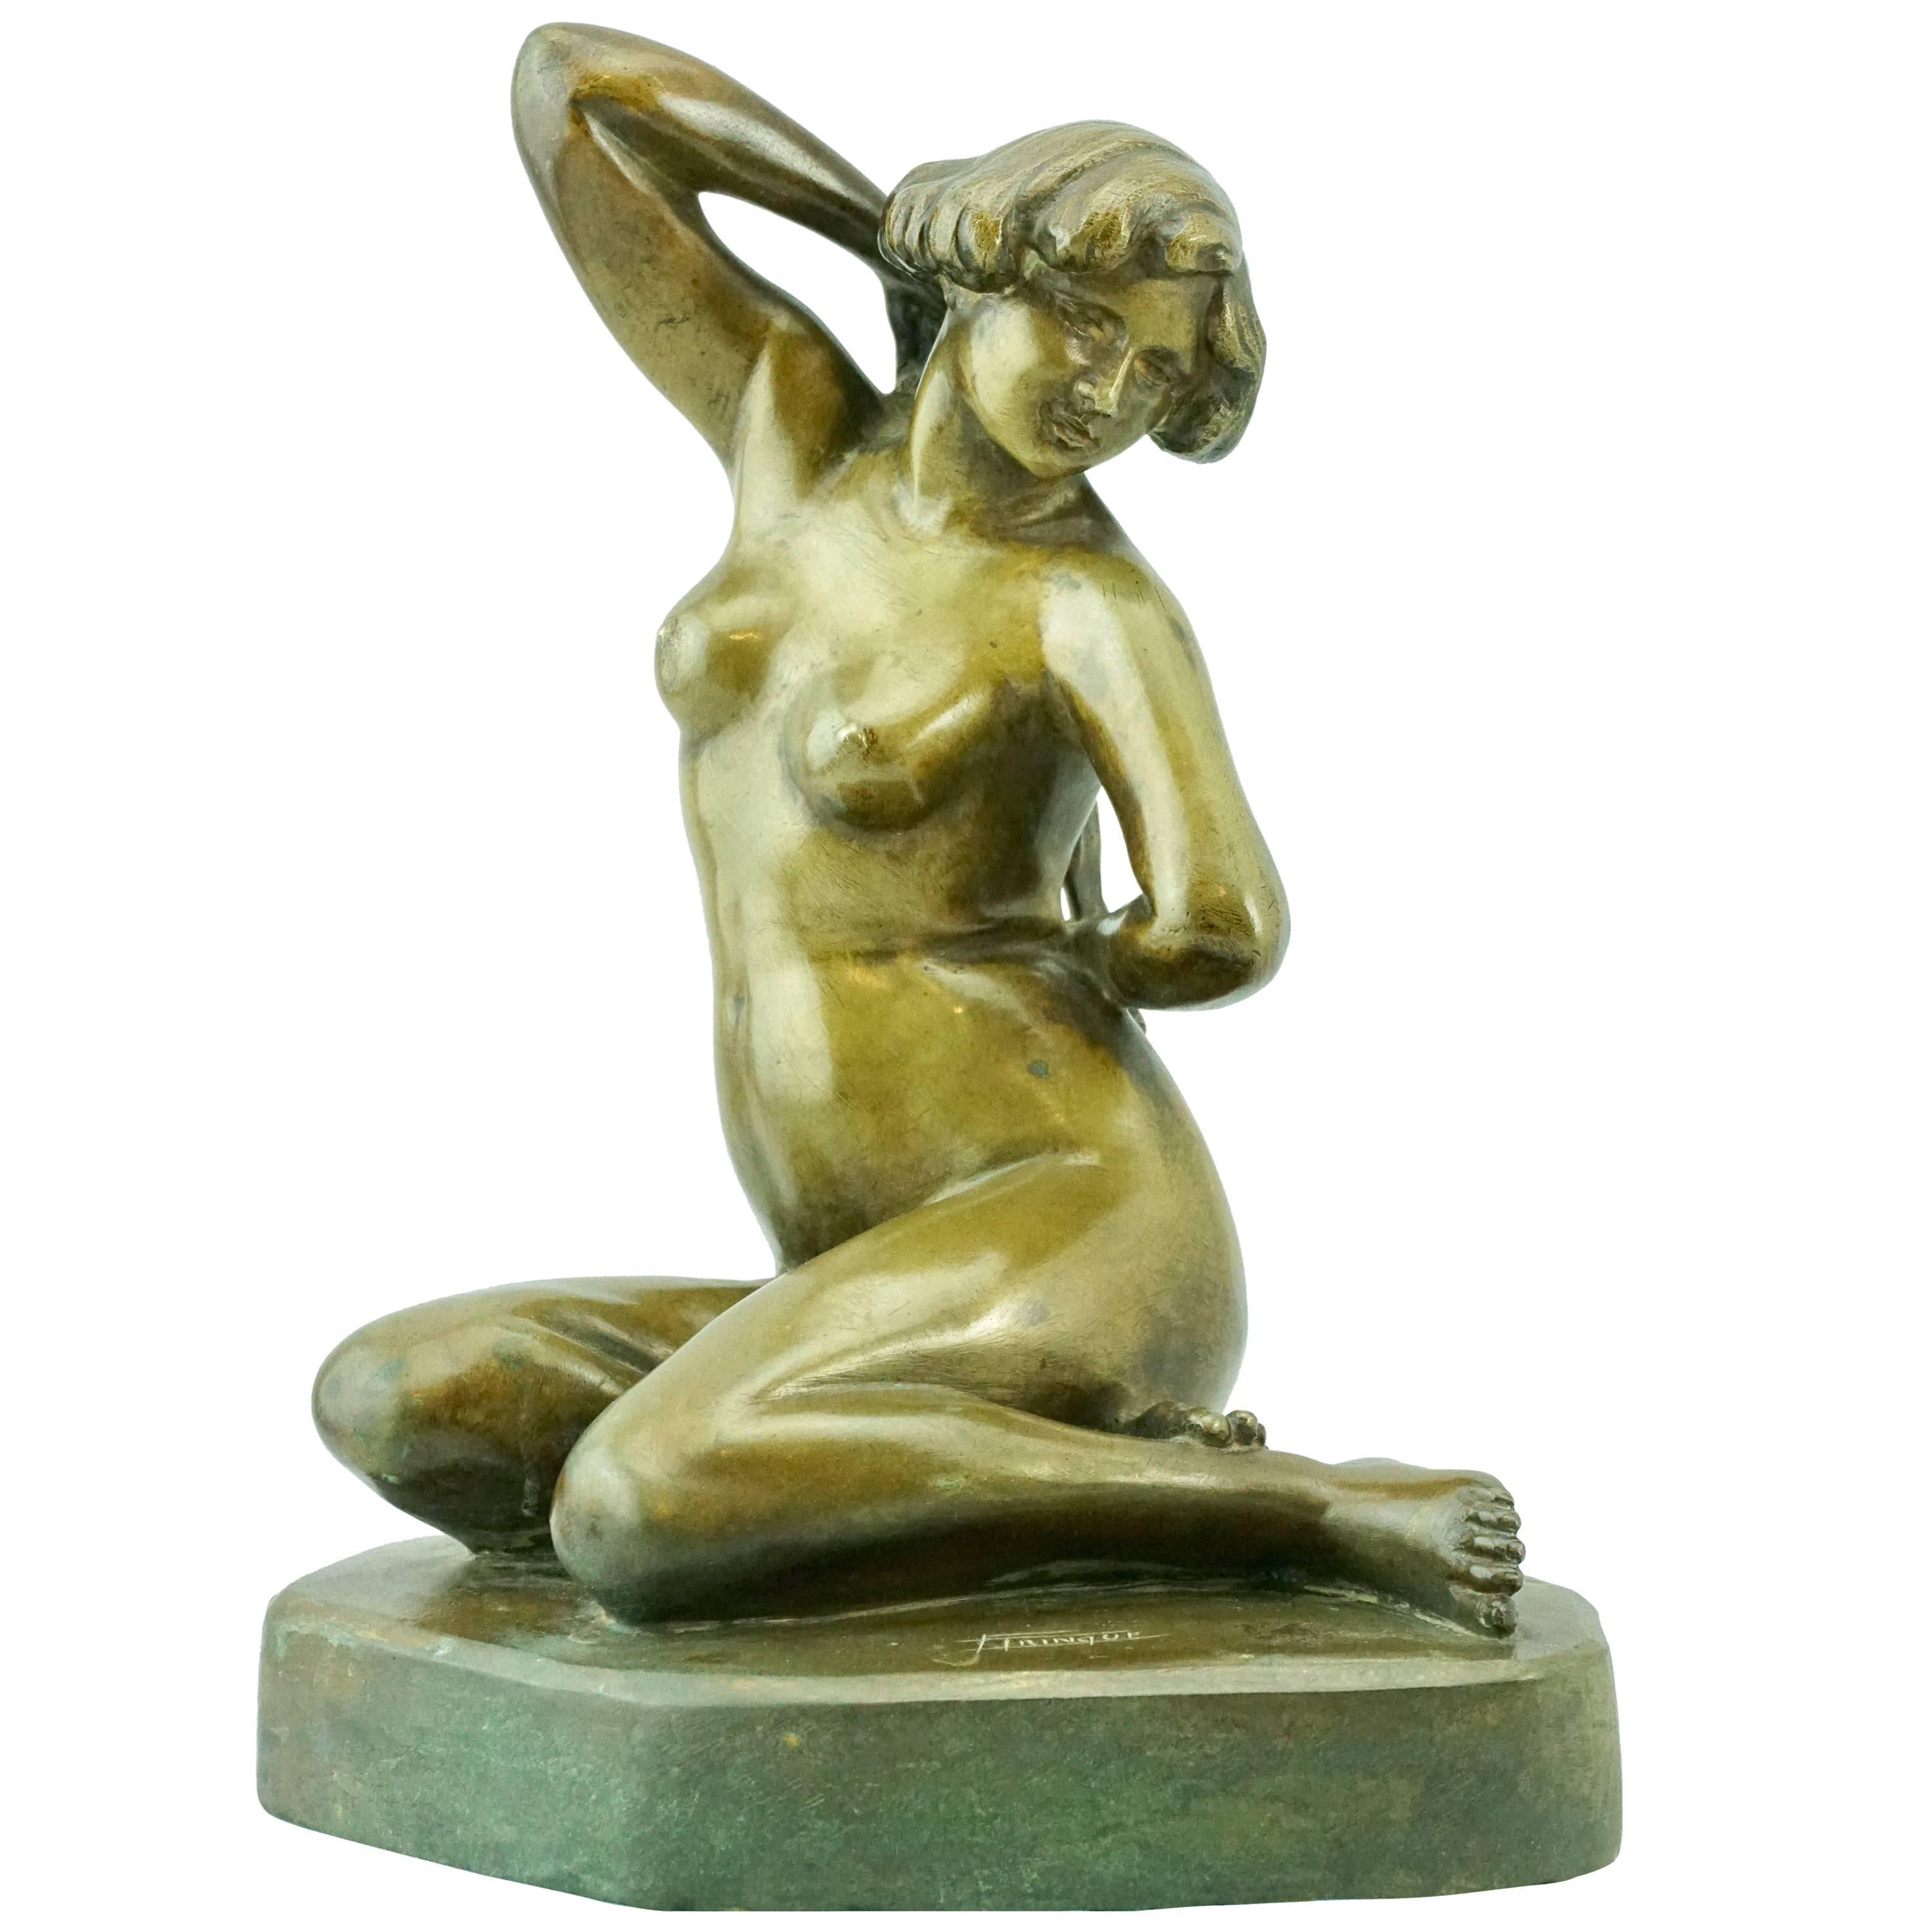 Charming French Art Deco Bronze Nude by F. Trinque, 1930